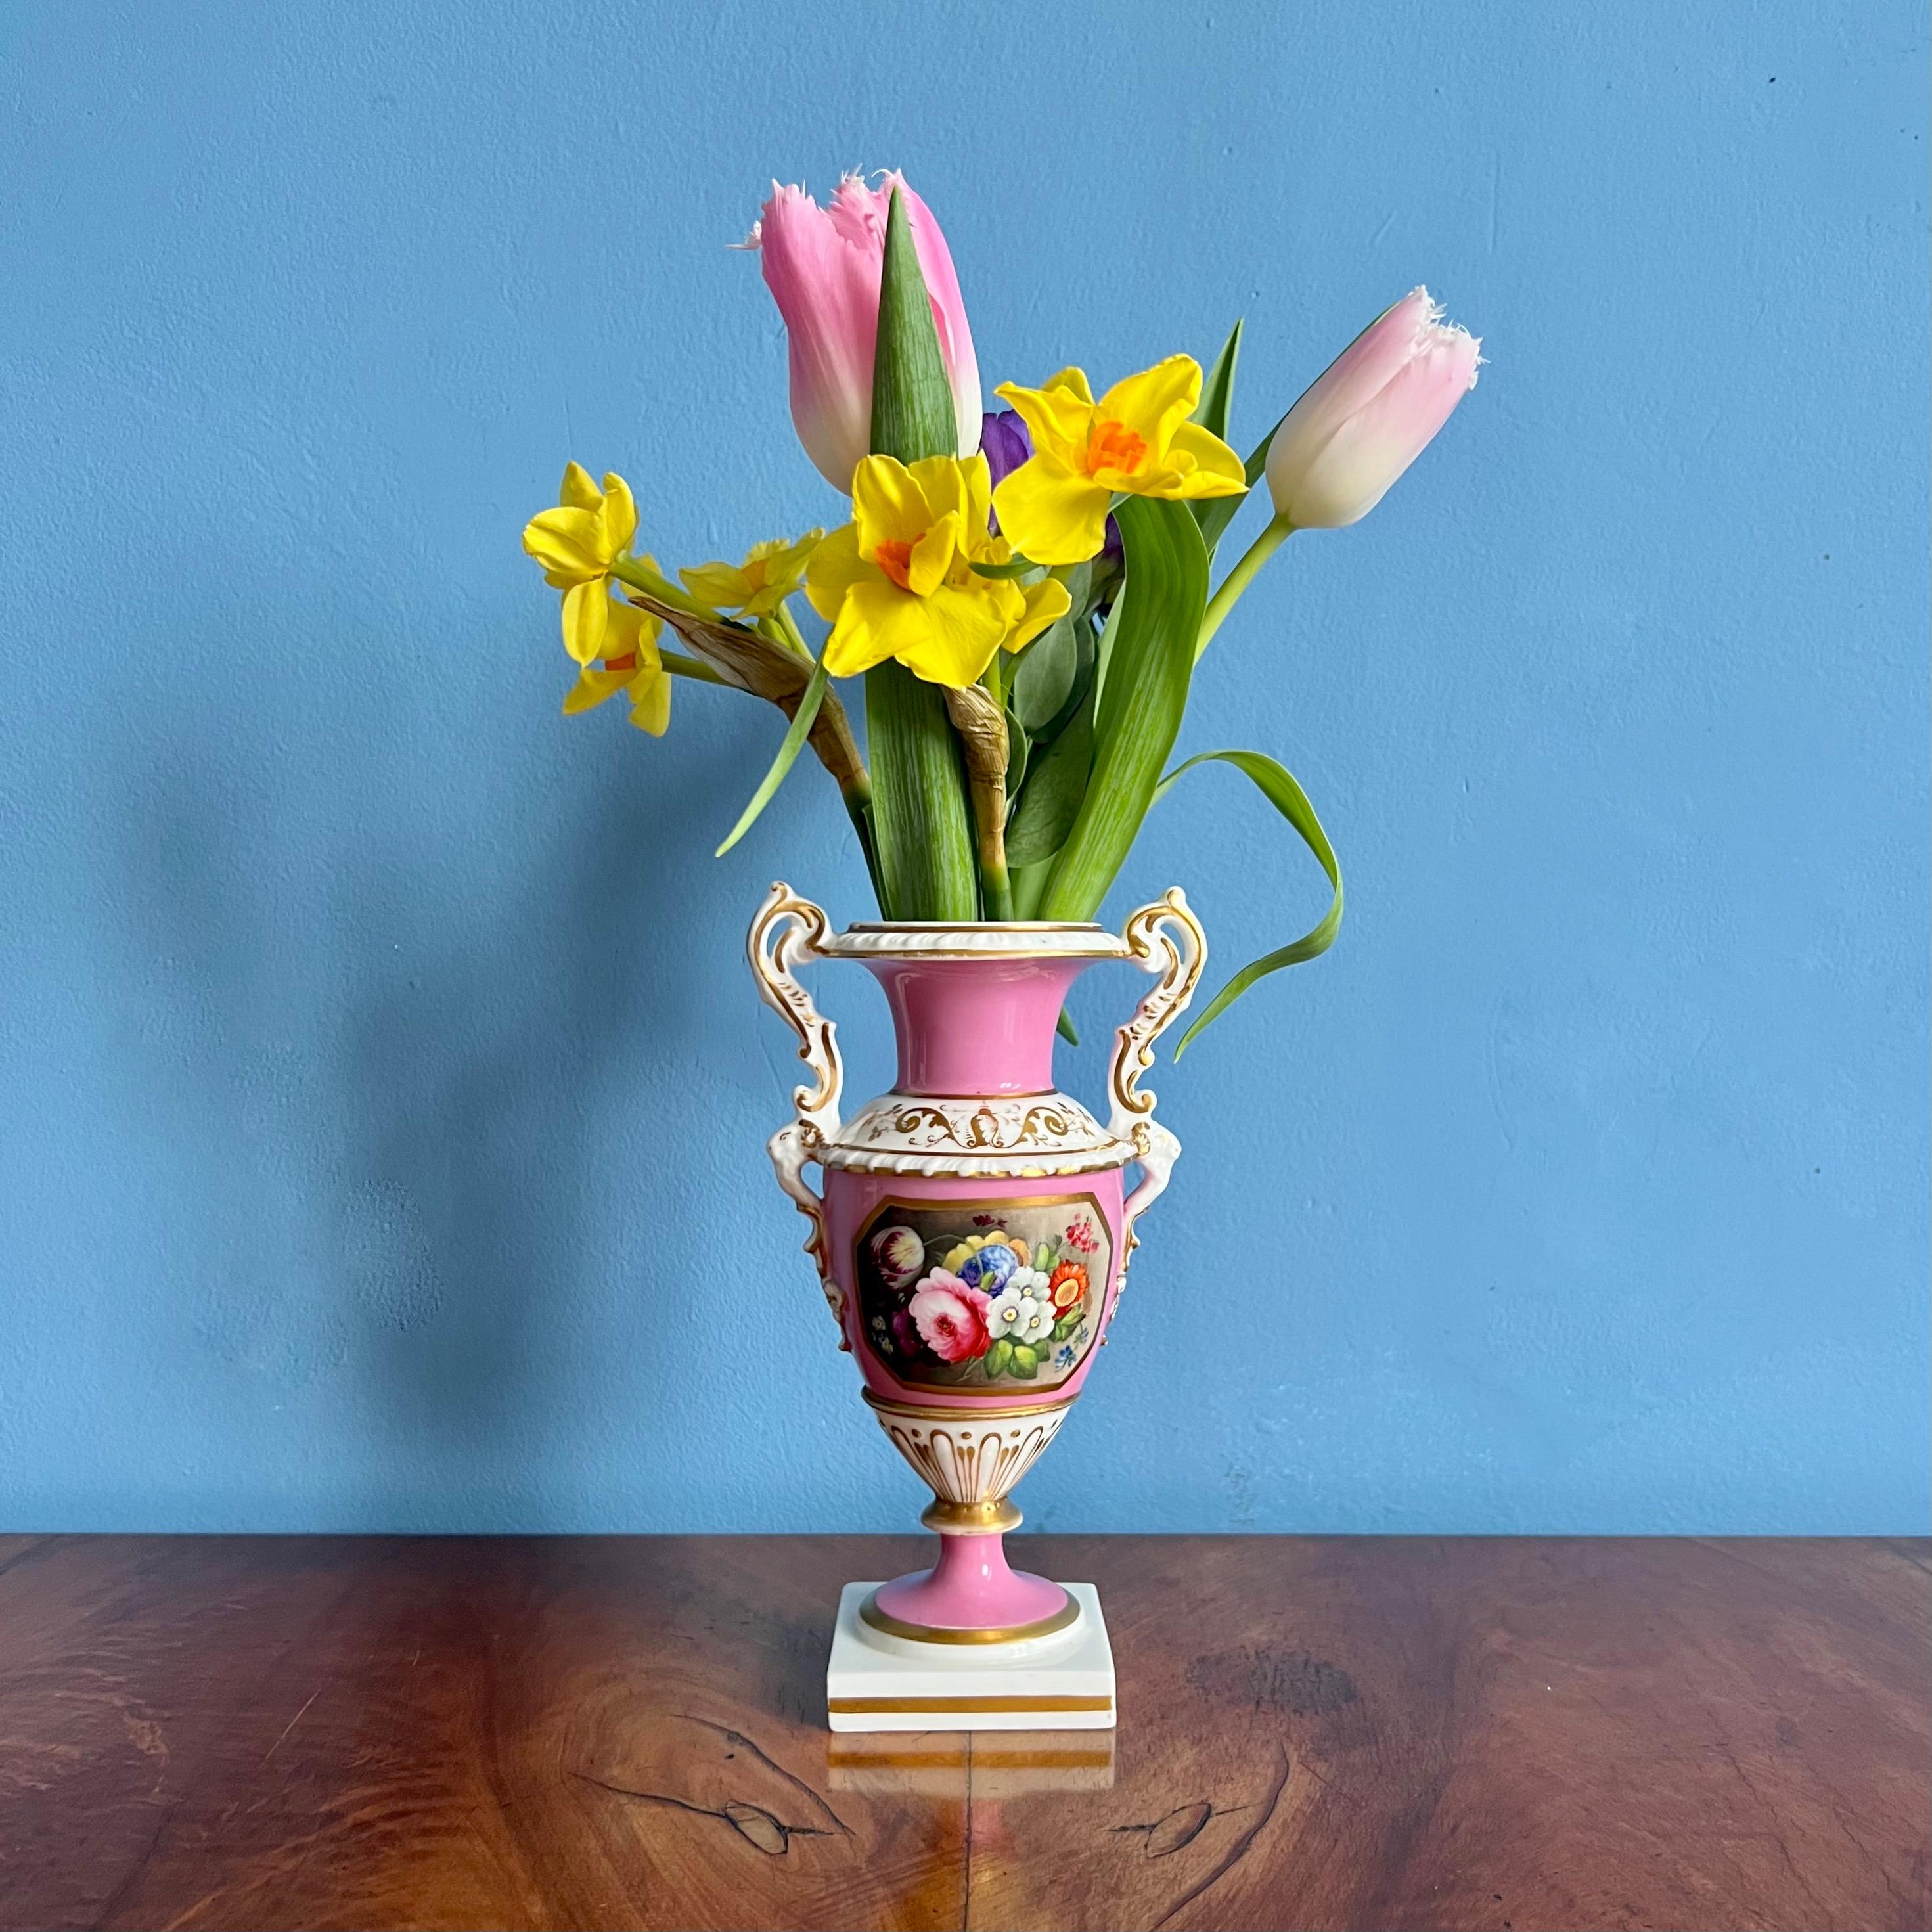 This is a stunning vase made by Minton between 1830 and 1835. The vase has a bright pink ground with a beautiful floral reserve in the front, and charmingly shaped white handles with rams heads.

Minton was one of the pioneers of English china